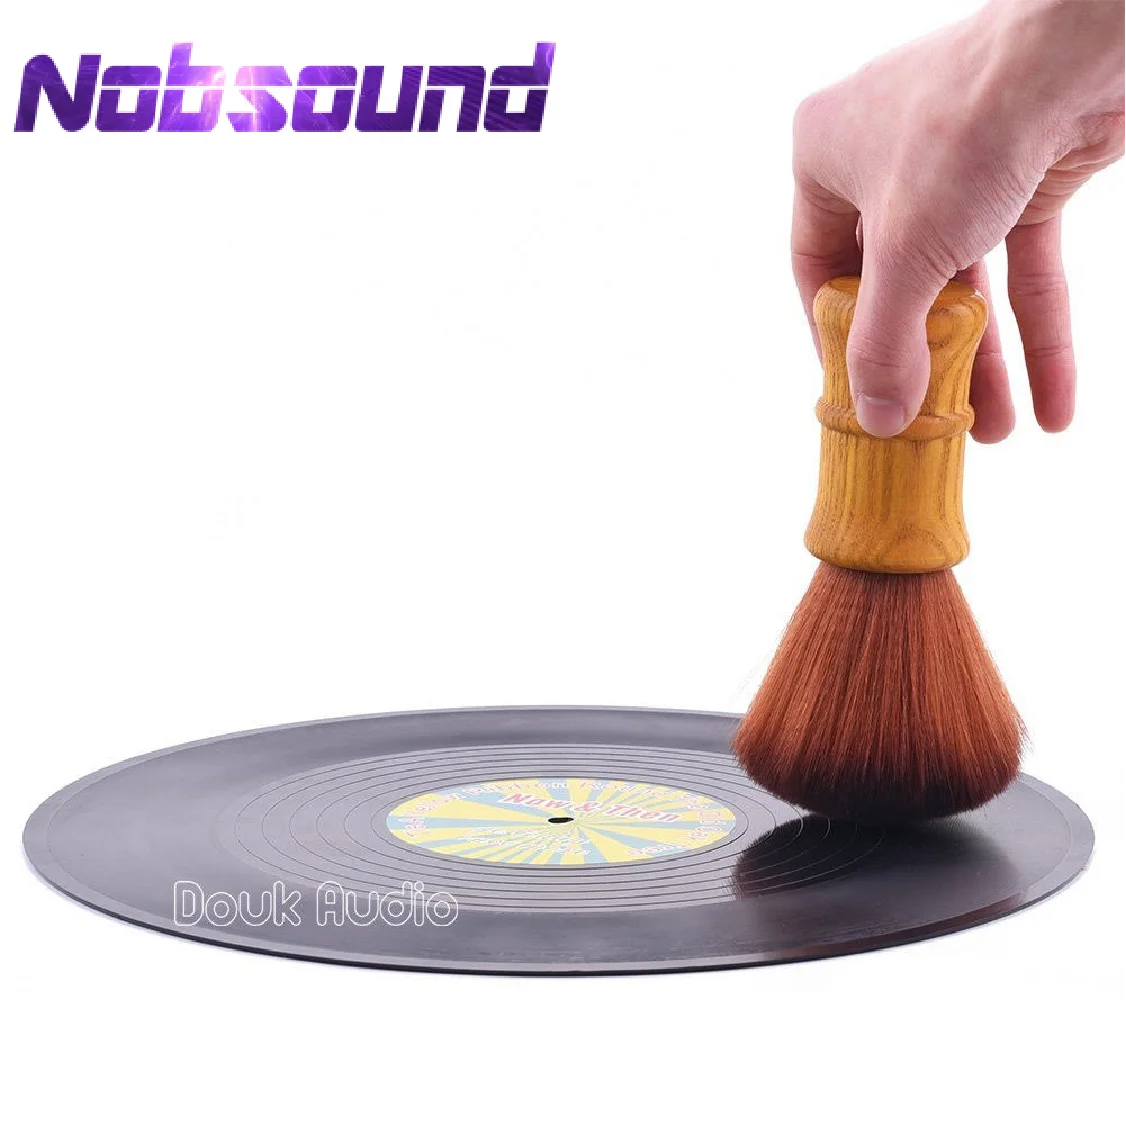 

Hifi Turntable Vinyl Record LP Cleaning Anti-Static Stylus Dust Brush Cleaner Soft Phonograph Player Accessories